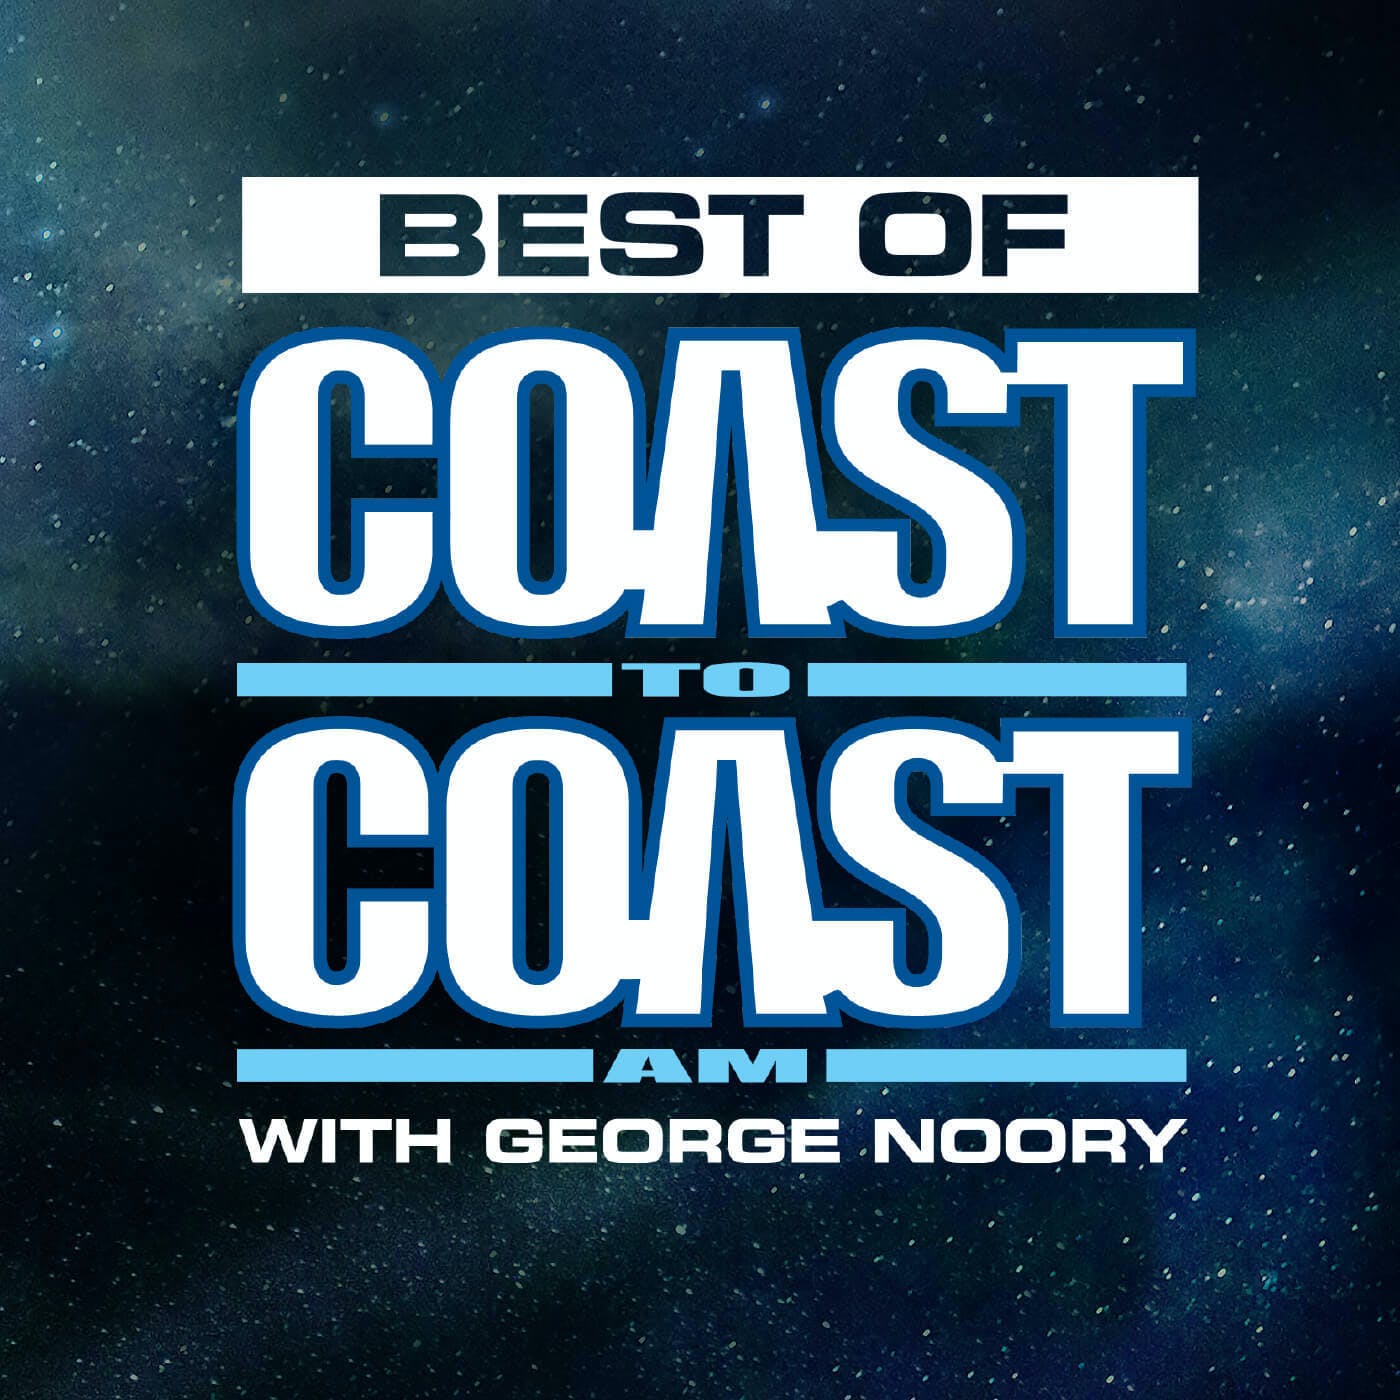 Contacting Spirits - Best of Coast to Coast AM - 9/27/23 : The Best of Coast to Coast AM podcast hosted by George Noory. A media phenomenon Coast to Coast AM deals with UFOs strange occurrences life after death  and other unexplained (and often inexplicable) phenomena.